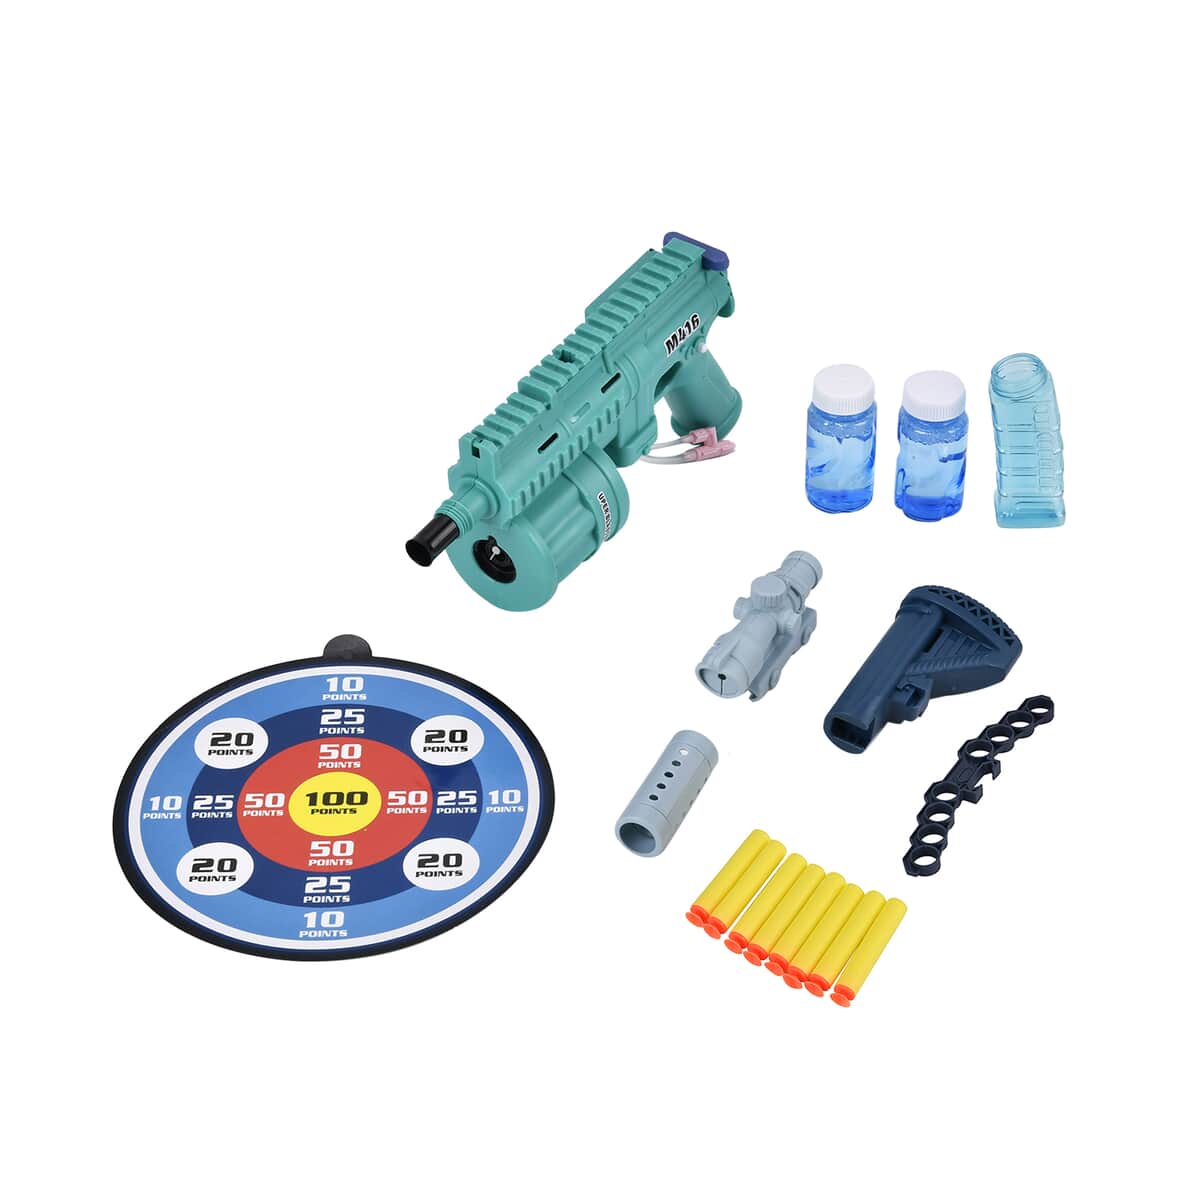 Multi Functional 3-in-1 Bubble Gun with Two Bottles of Bubble Liquid and 8 Soft Foam Bullets (3 AA batteries Not Included) image number 5